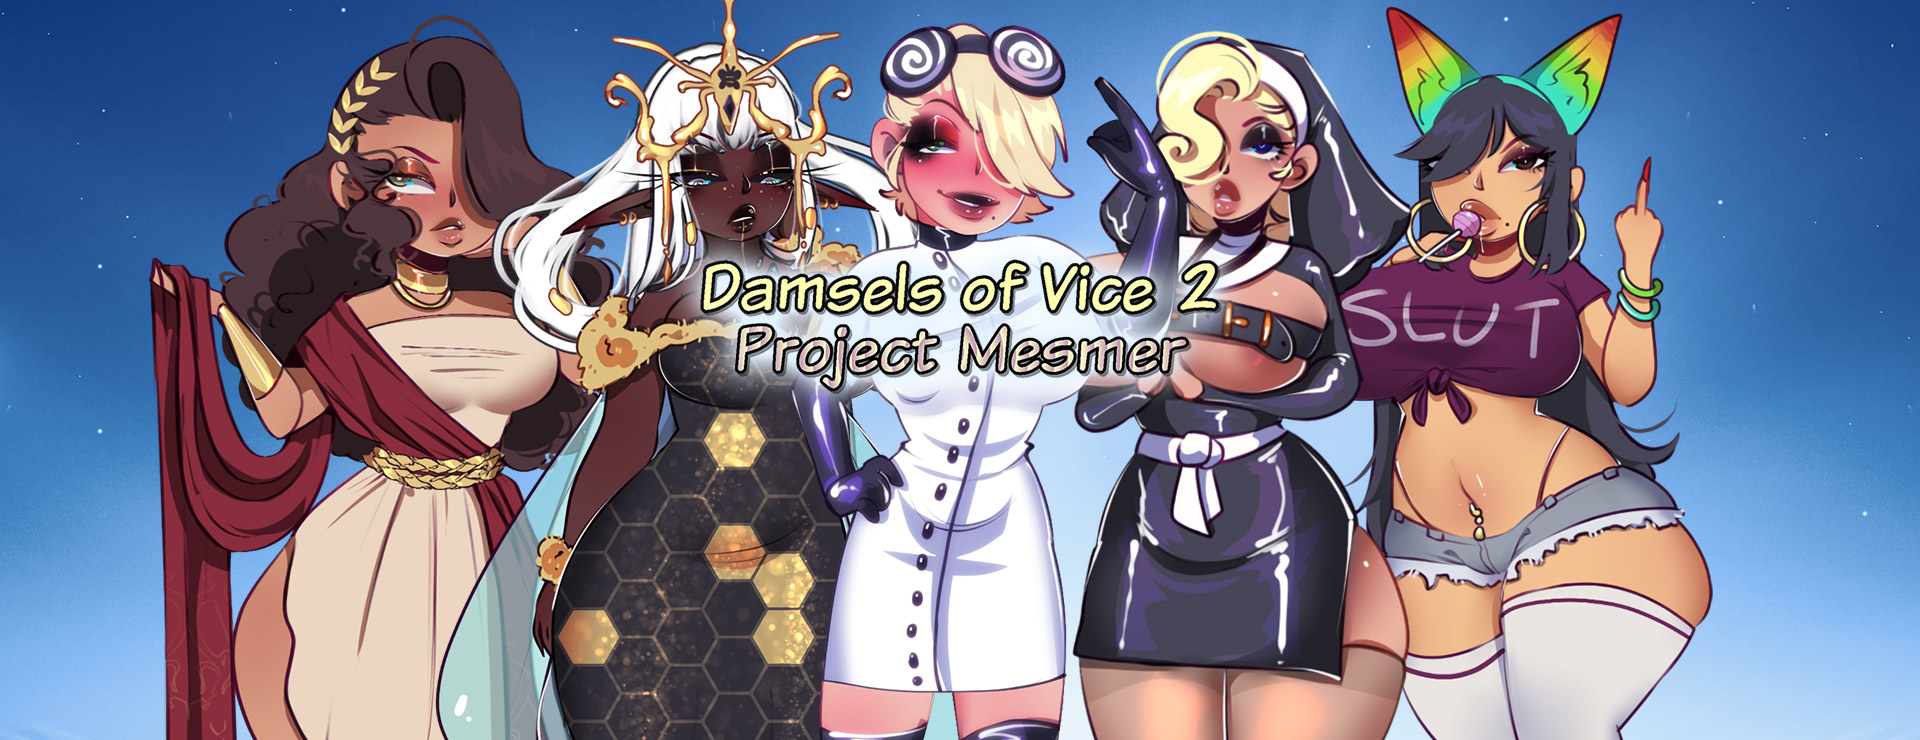 Damsels of Vice 2: Project Mesmer - RPG Juego